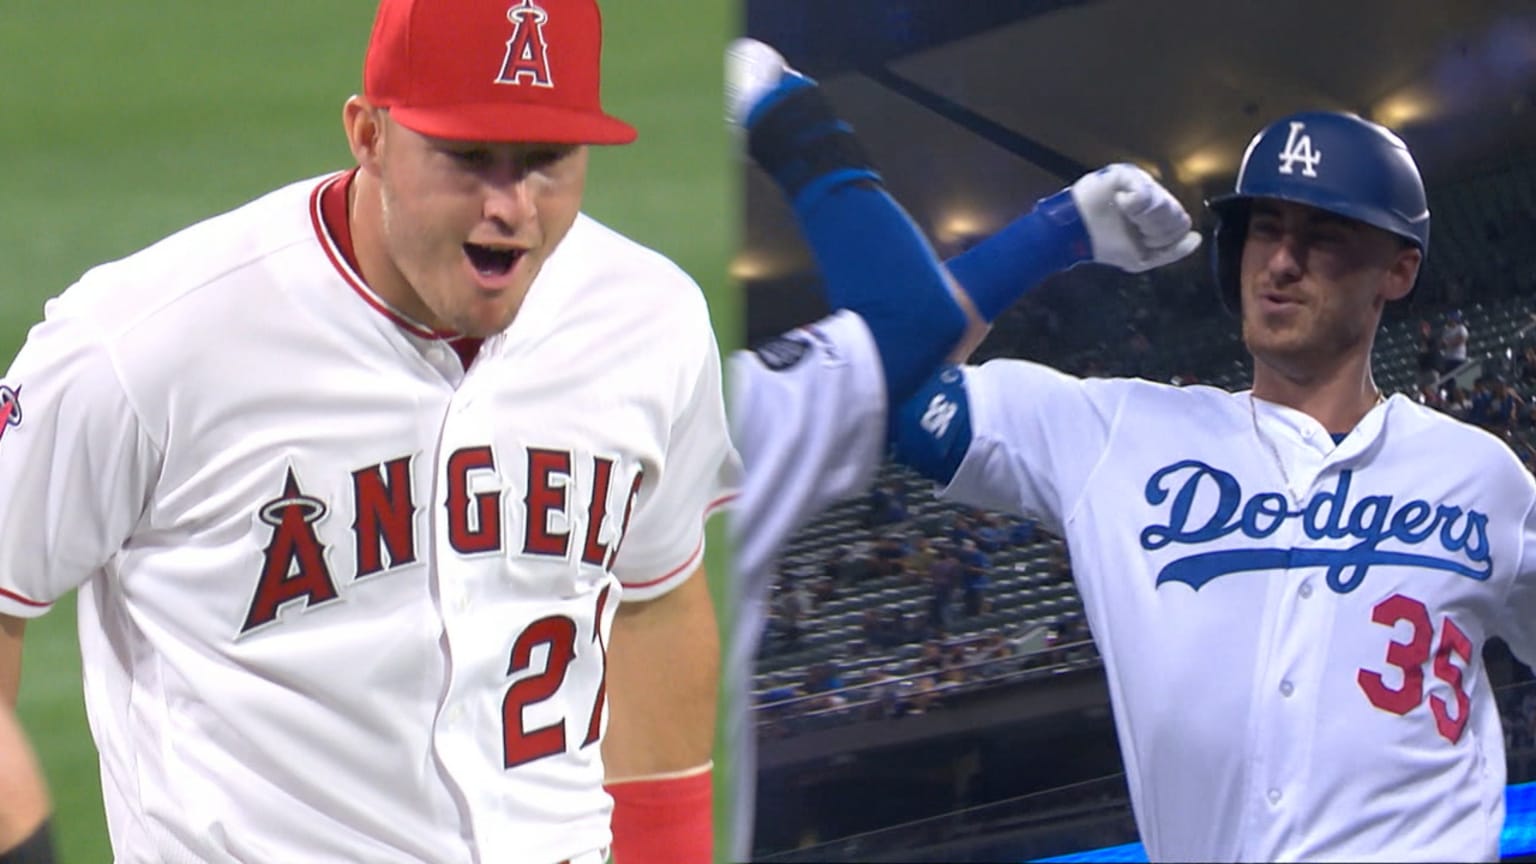 Mike Trout gives AL punch with MVP performance